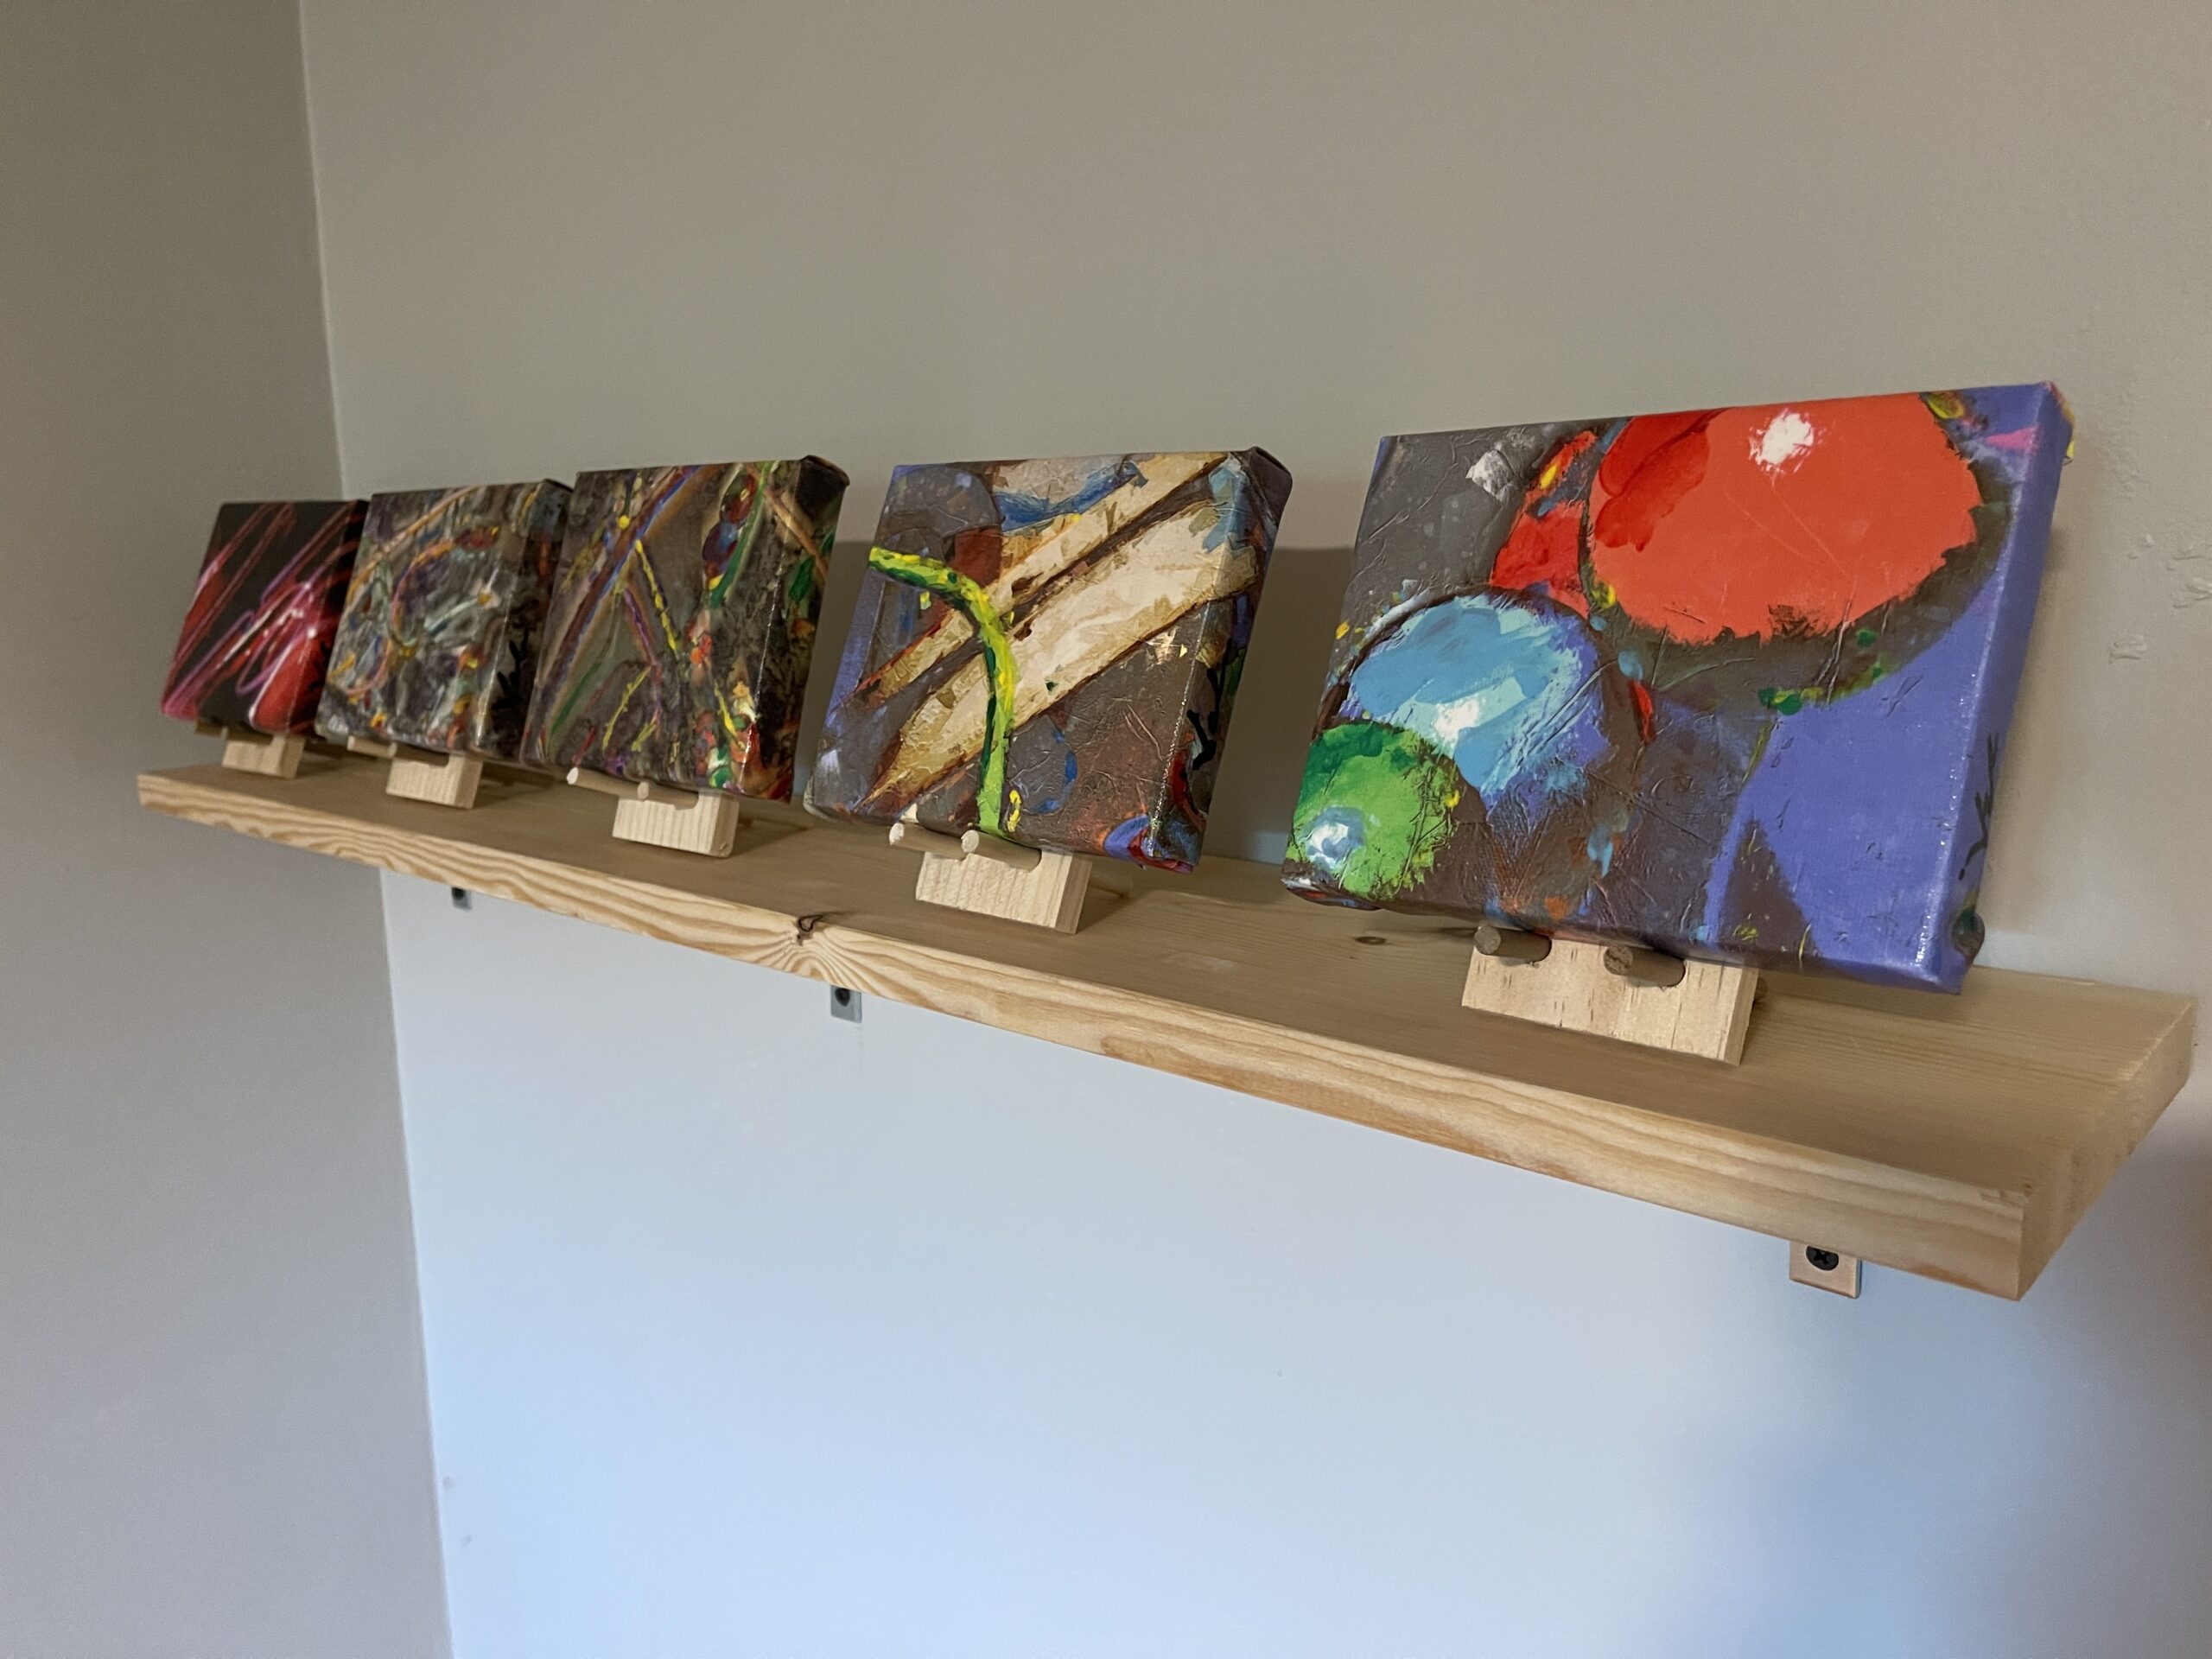 Gallery wrapped abstract original paintings by Michael John Valentine